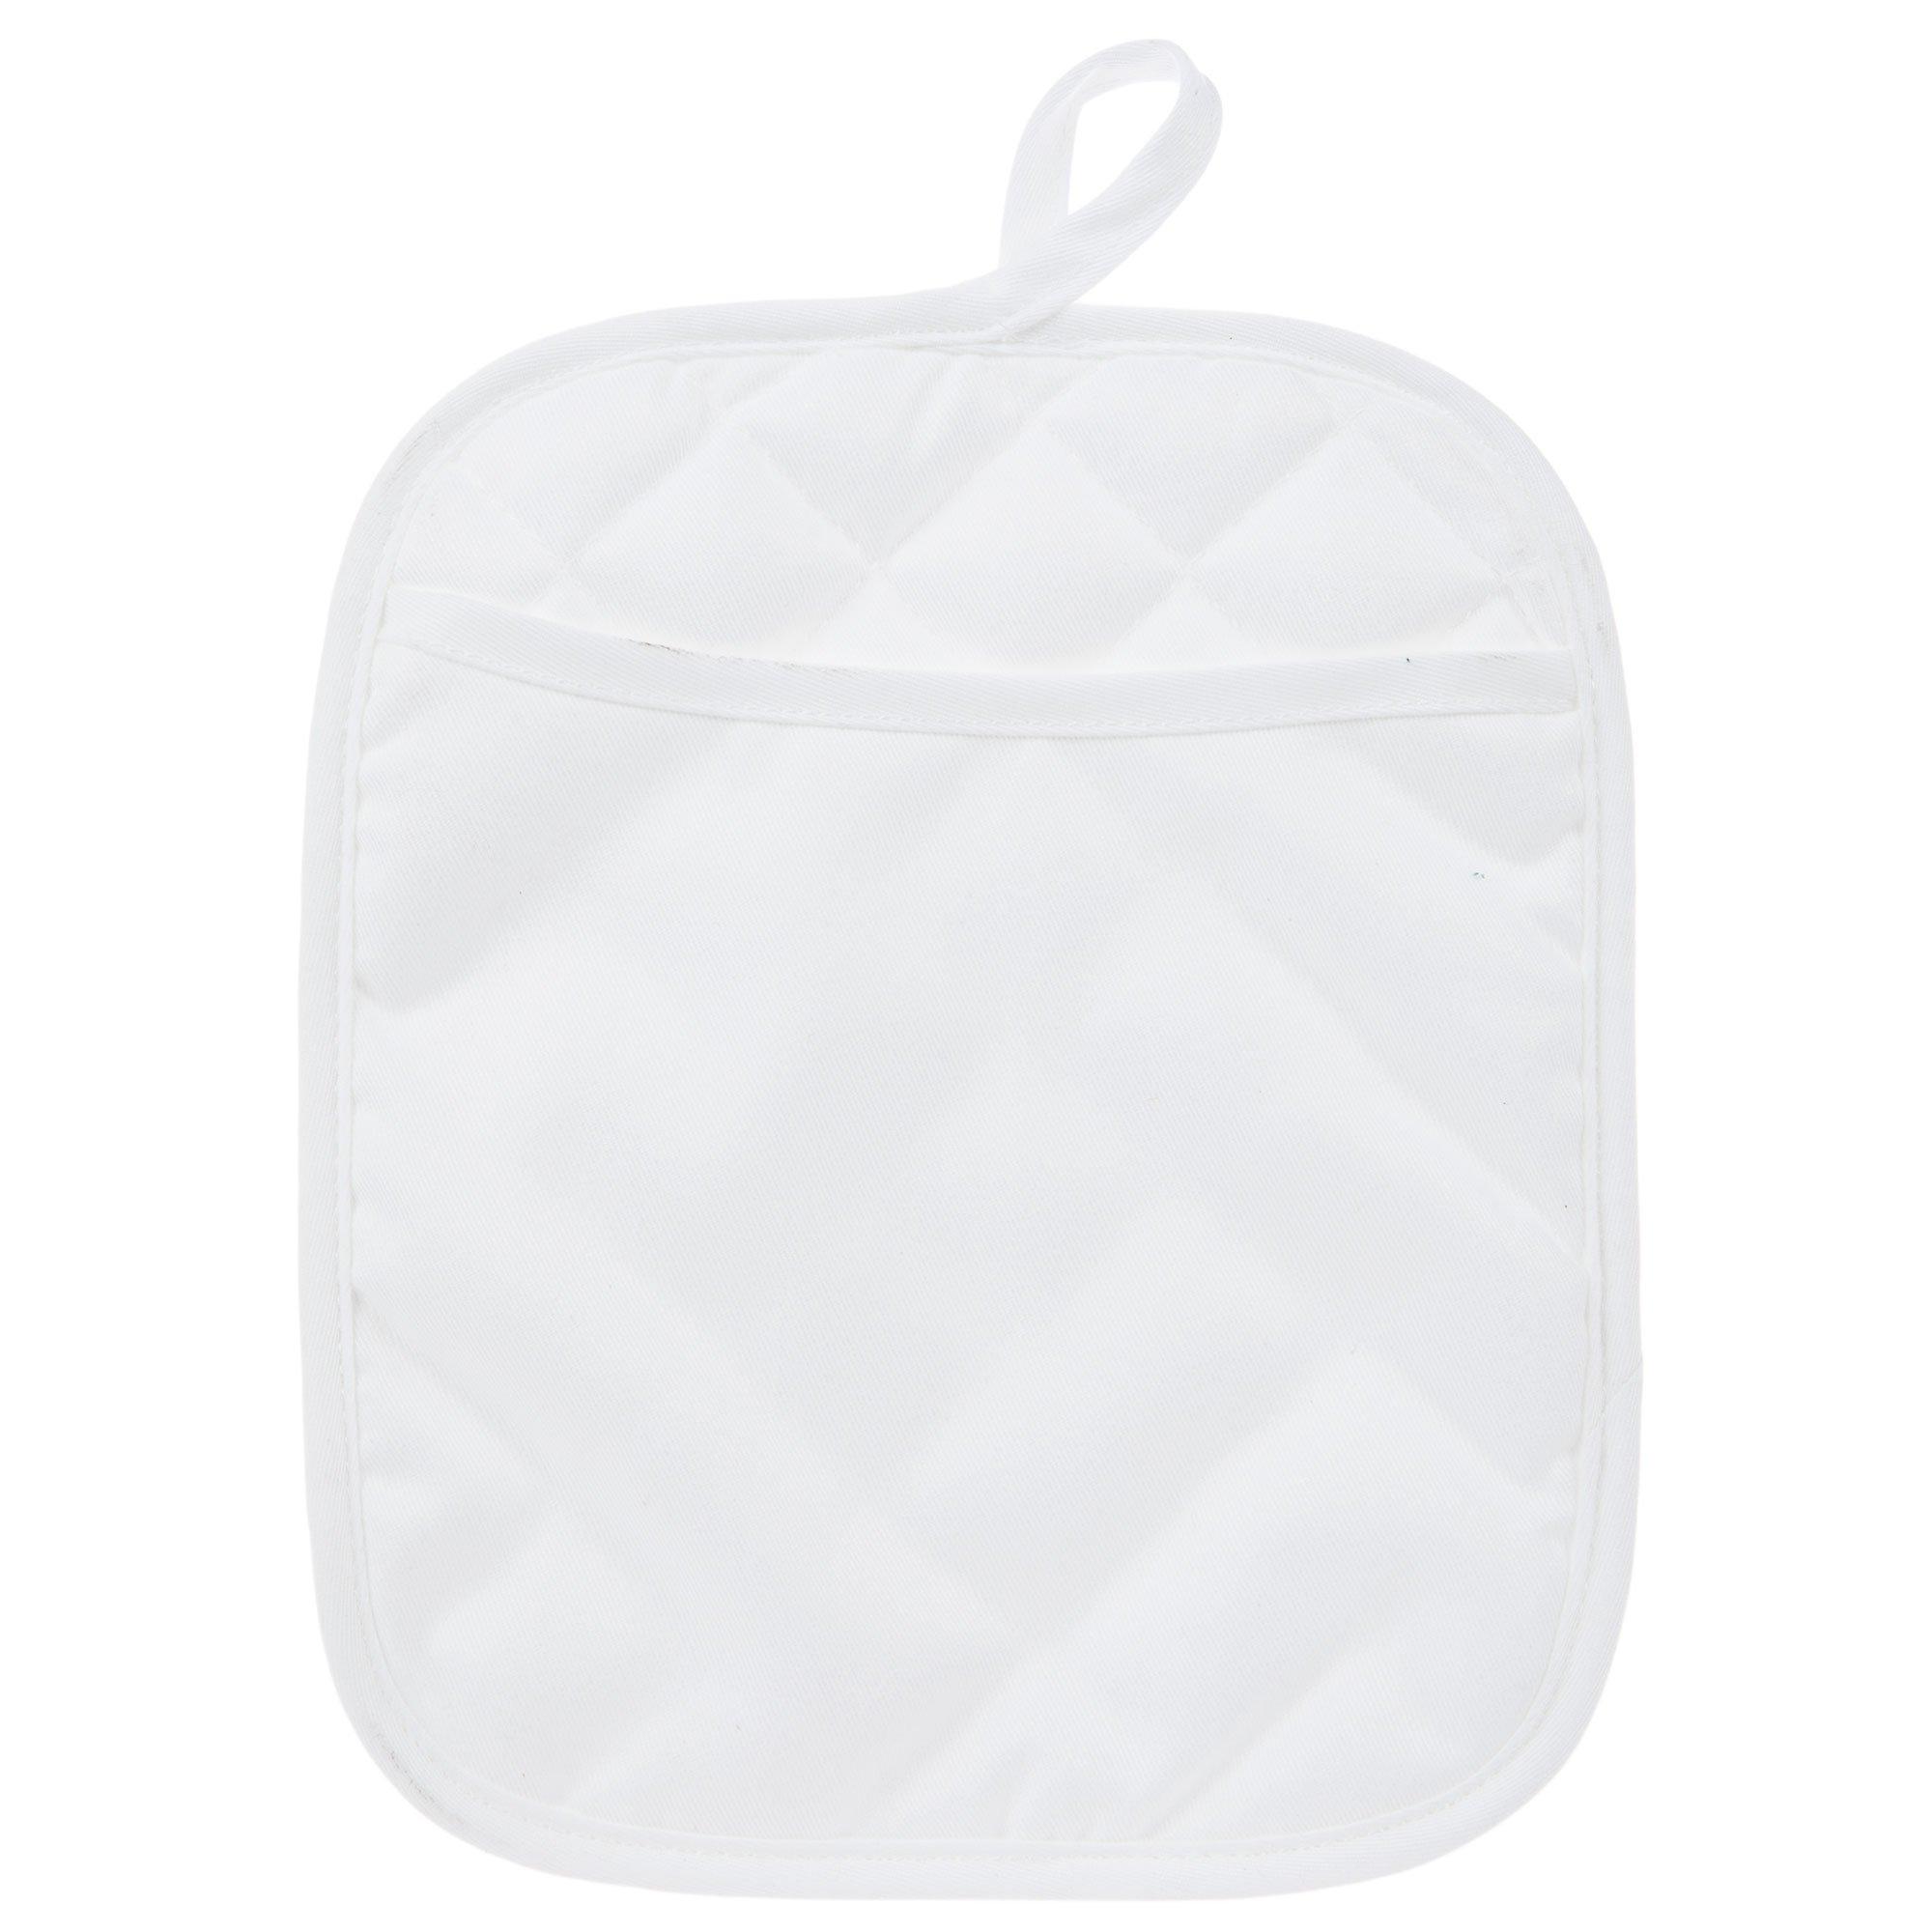 Sublimation Blanks 9x7 White Pot Holders with Sublimation Pocket